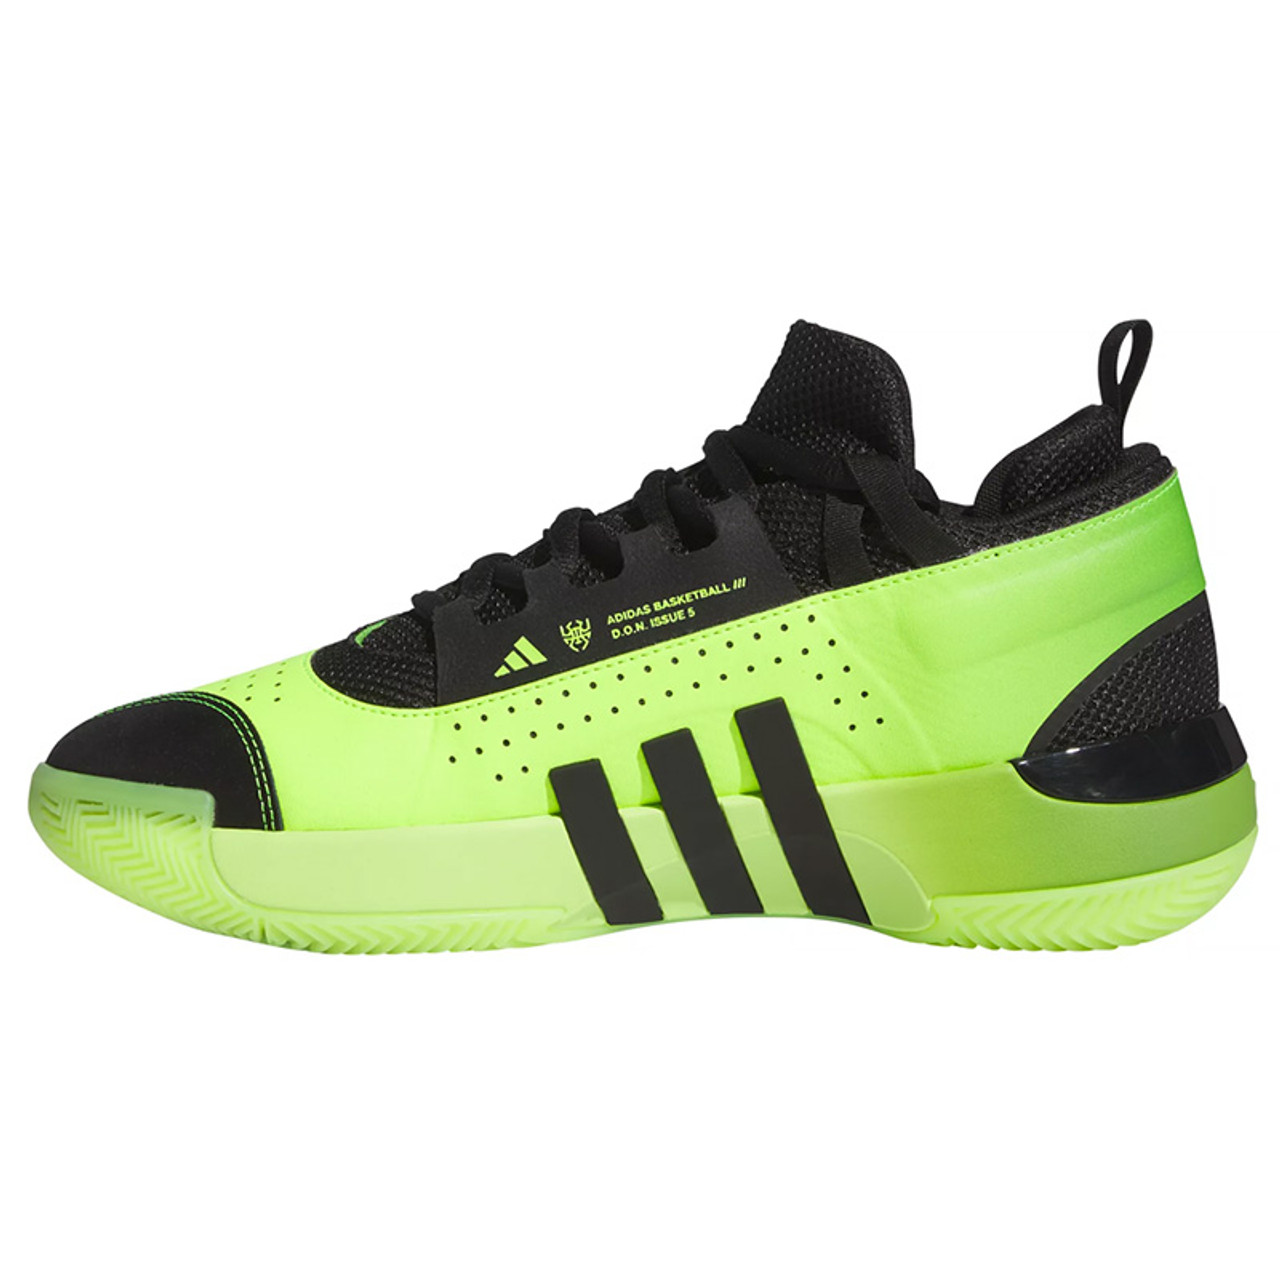 D.O.N. ISSUE #5 Shoes in Neon Fade | Center Court the official Cavs ...